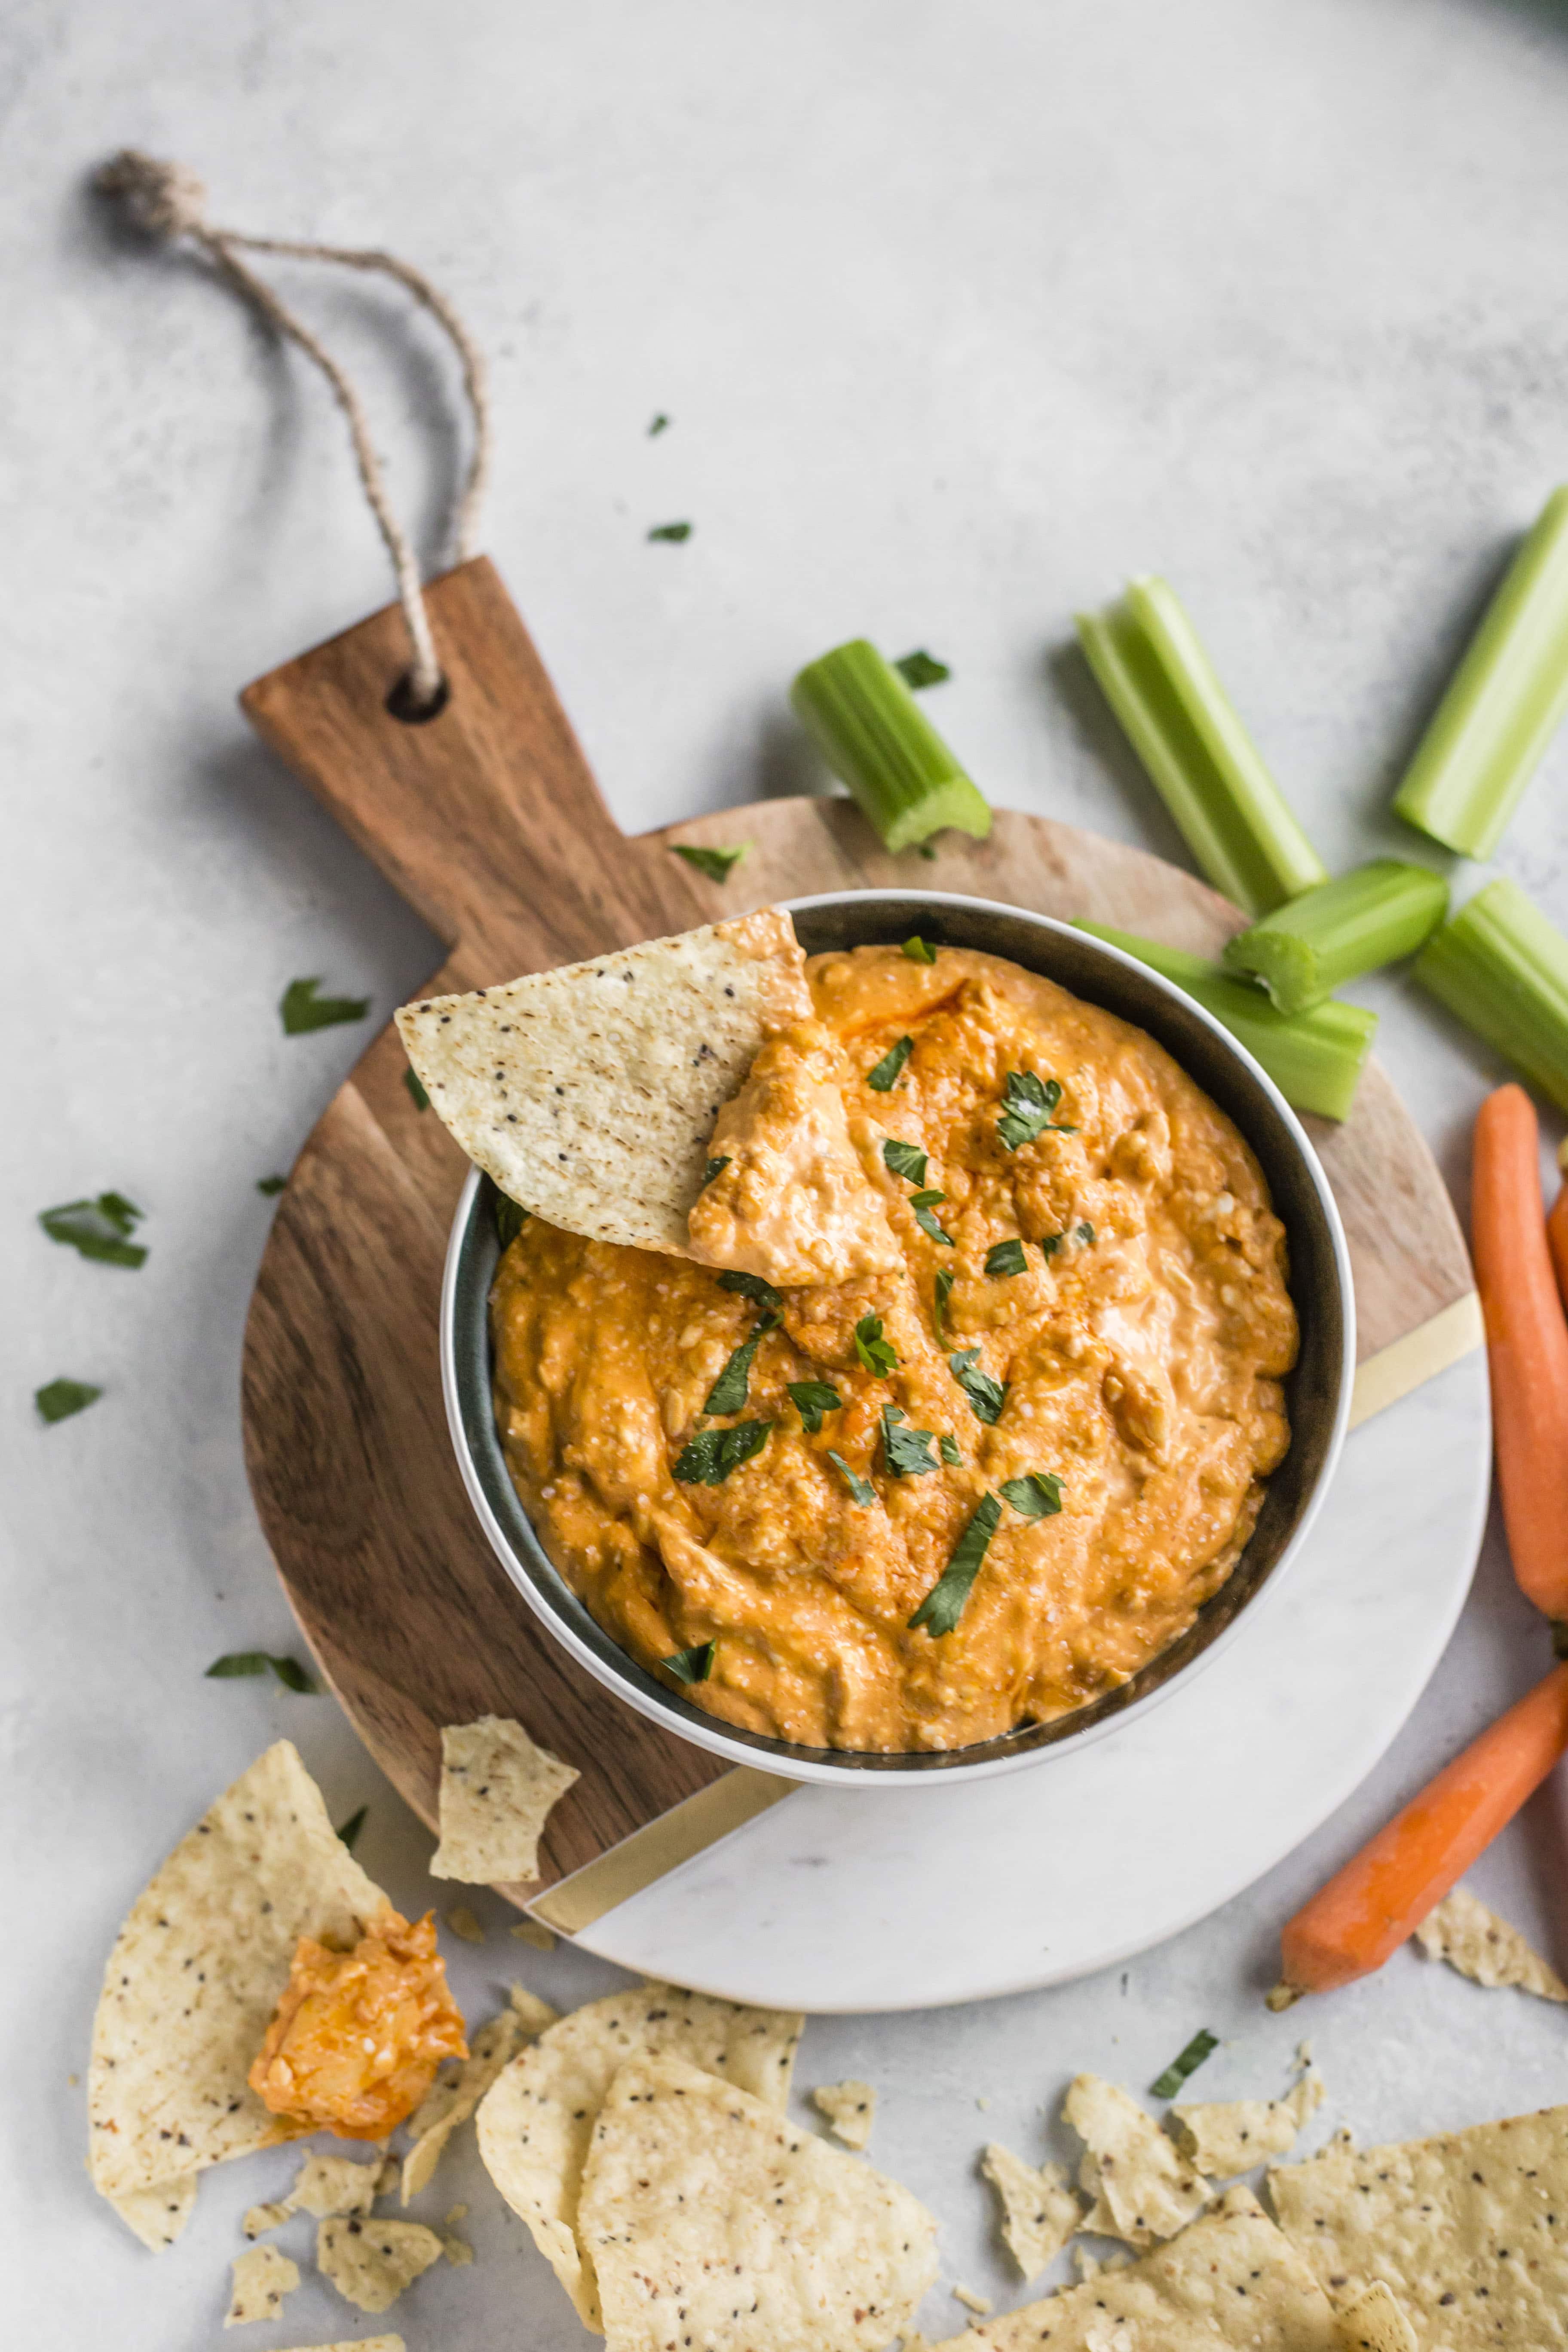 This is the best buffalo chicken dip recipe! Creamy, cheesy, slightly spicy and full of delicious chicken and flavors. Perfect for tailgating, football games, parties and weekends. This recipe is classic and super easy to make. I howsweeteats.com #buffalo #chicken #dip #recipe